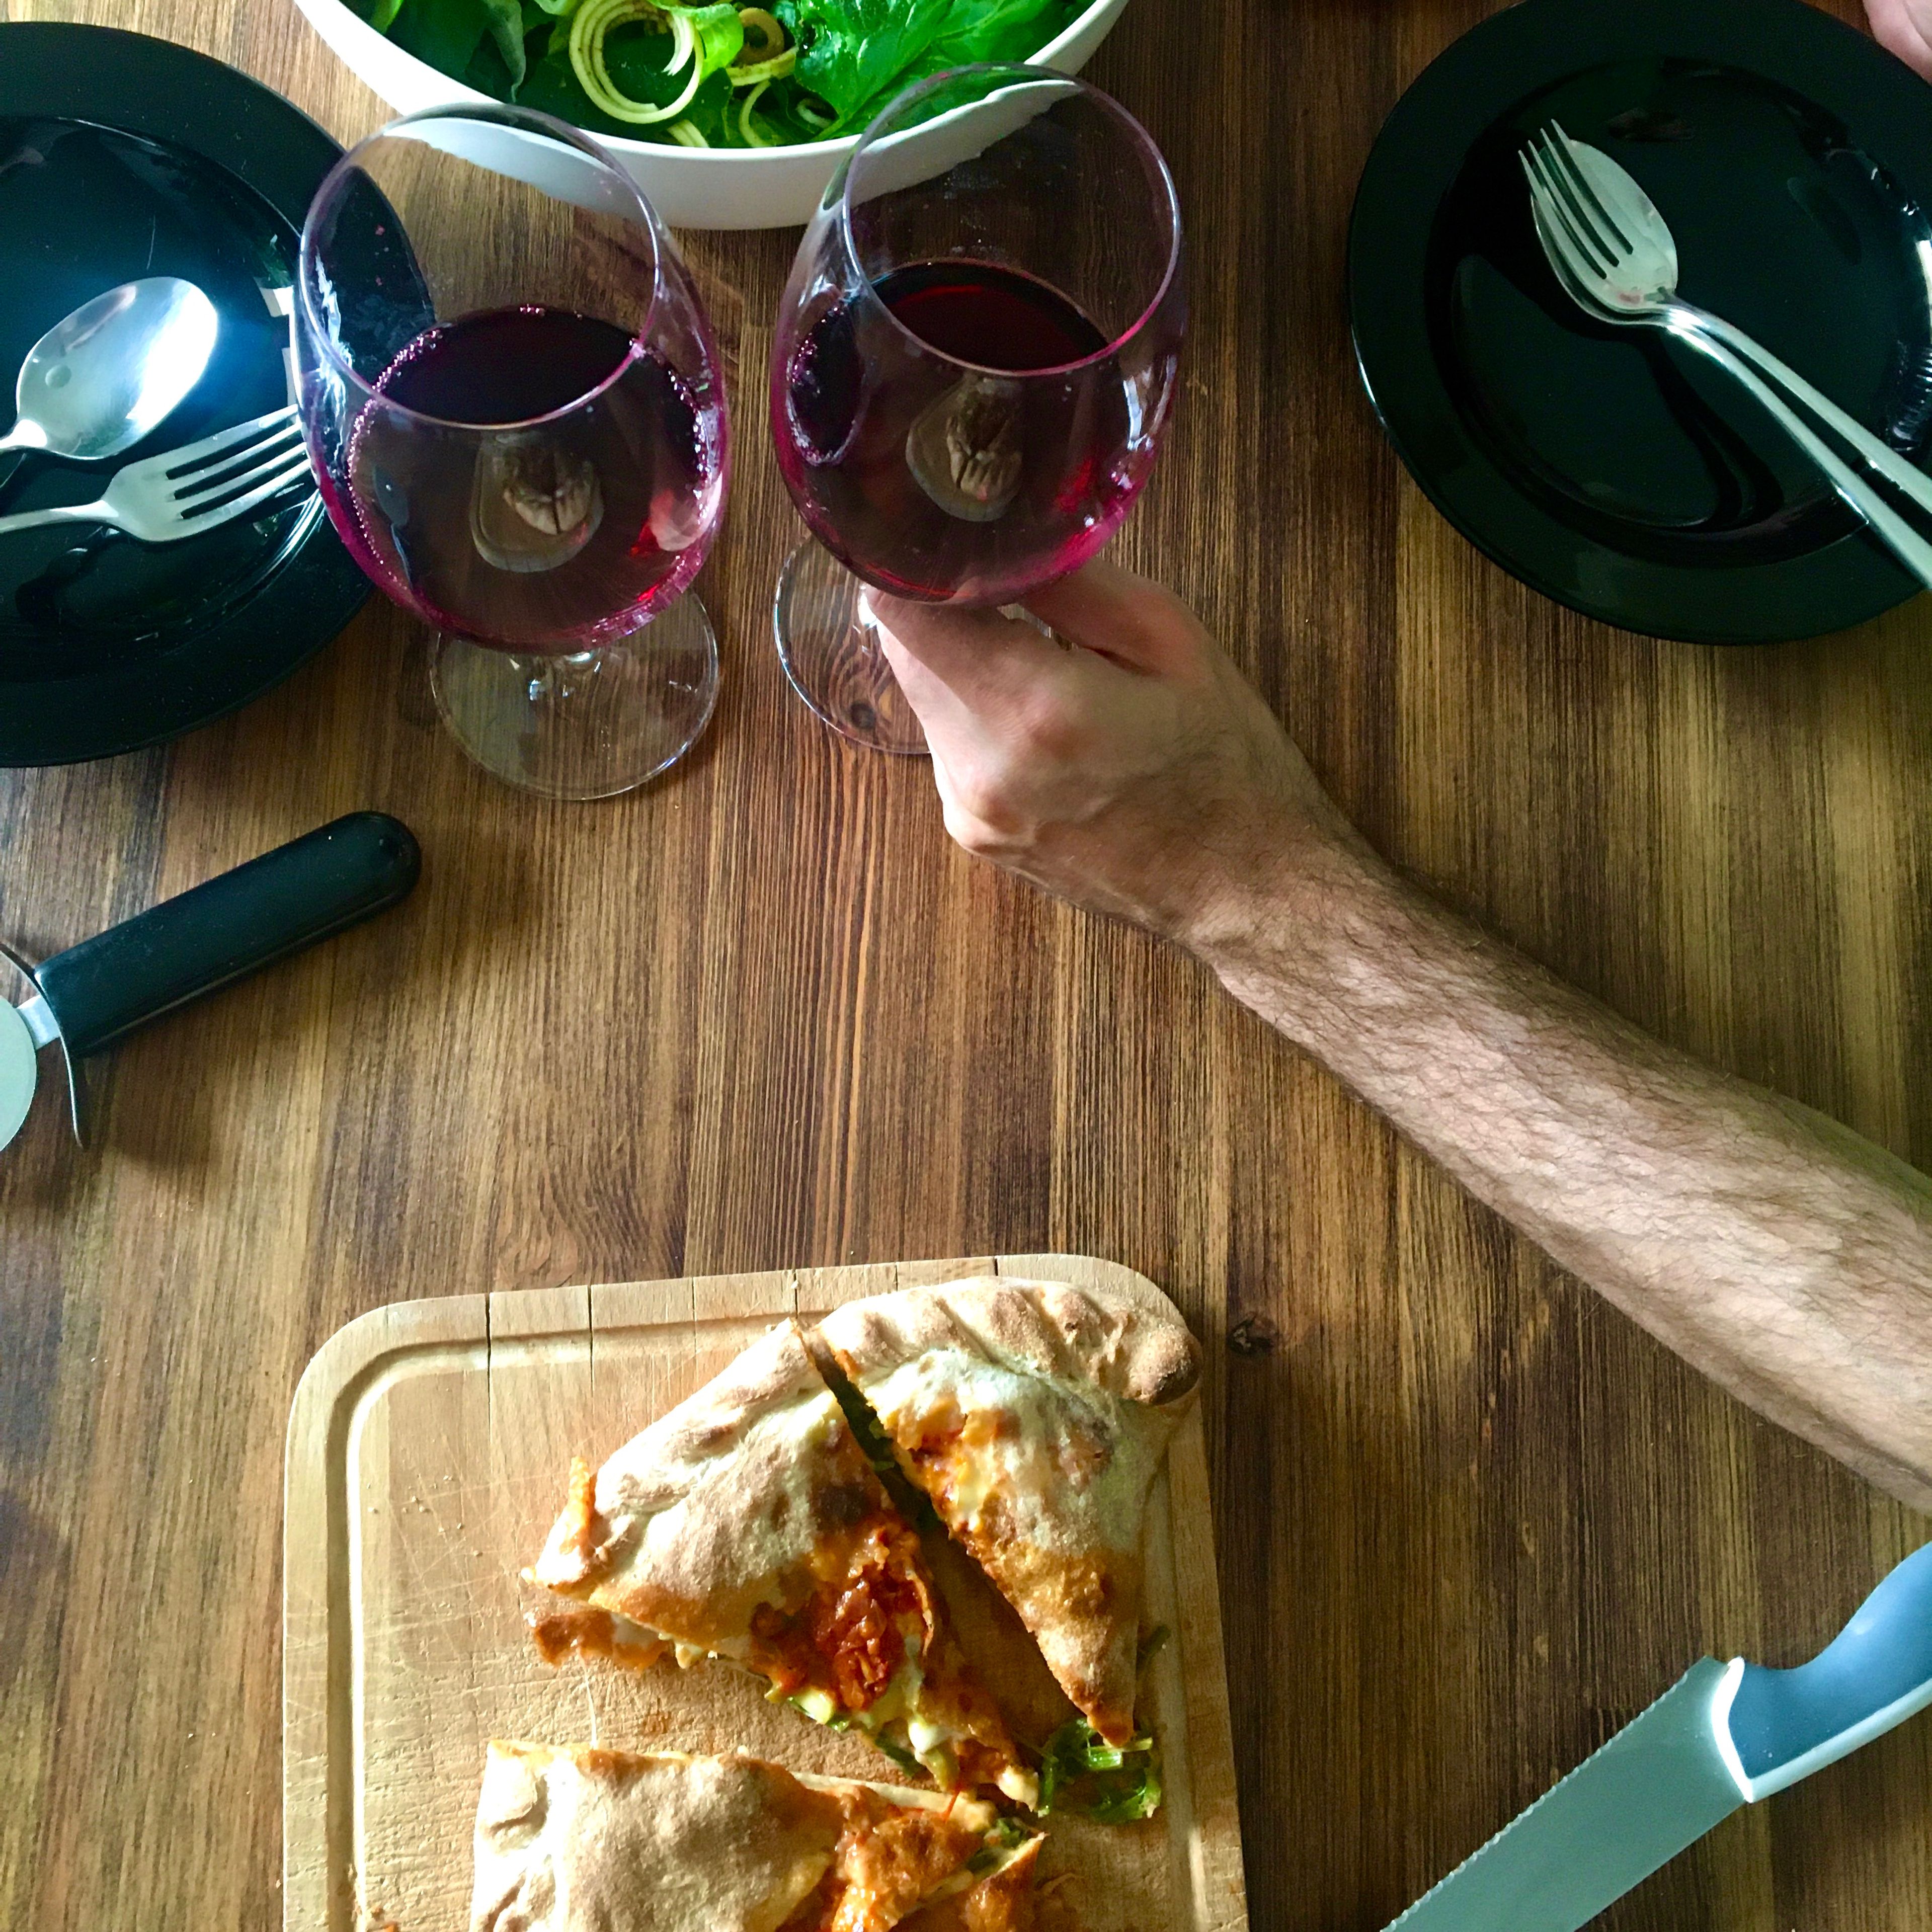 Serve the calzones with remaining tomato sauce, preferably a good wine and some light green salad. Enjoy with your best mate!